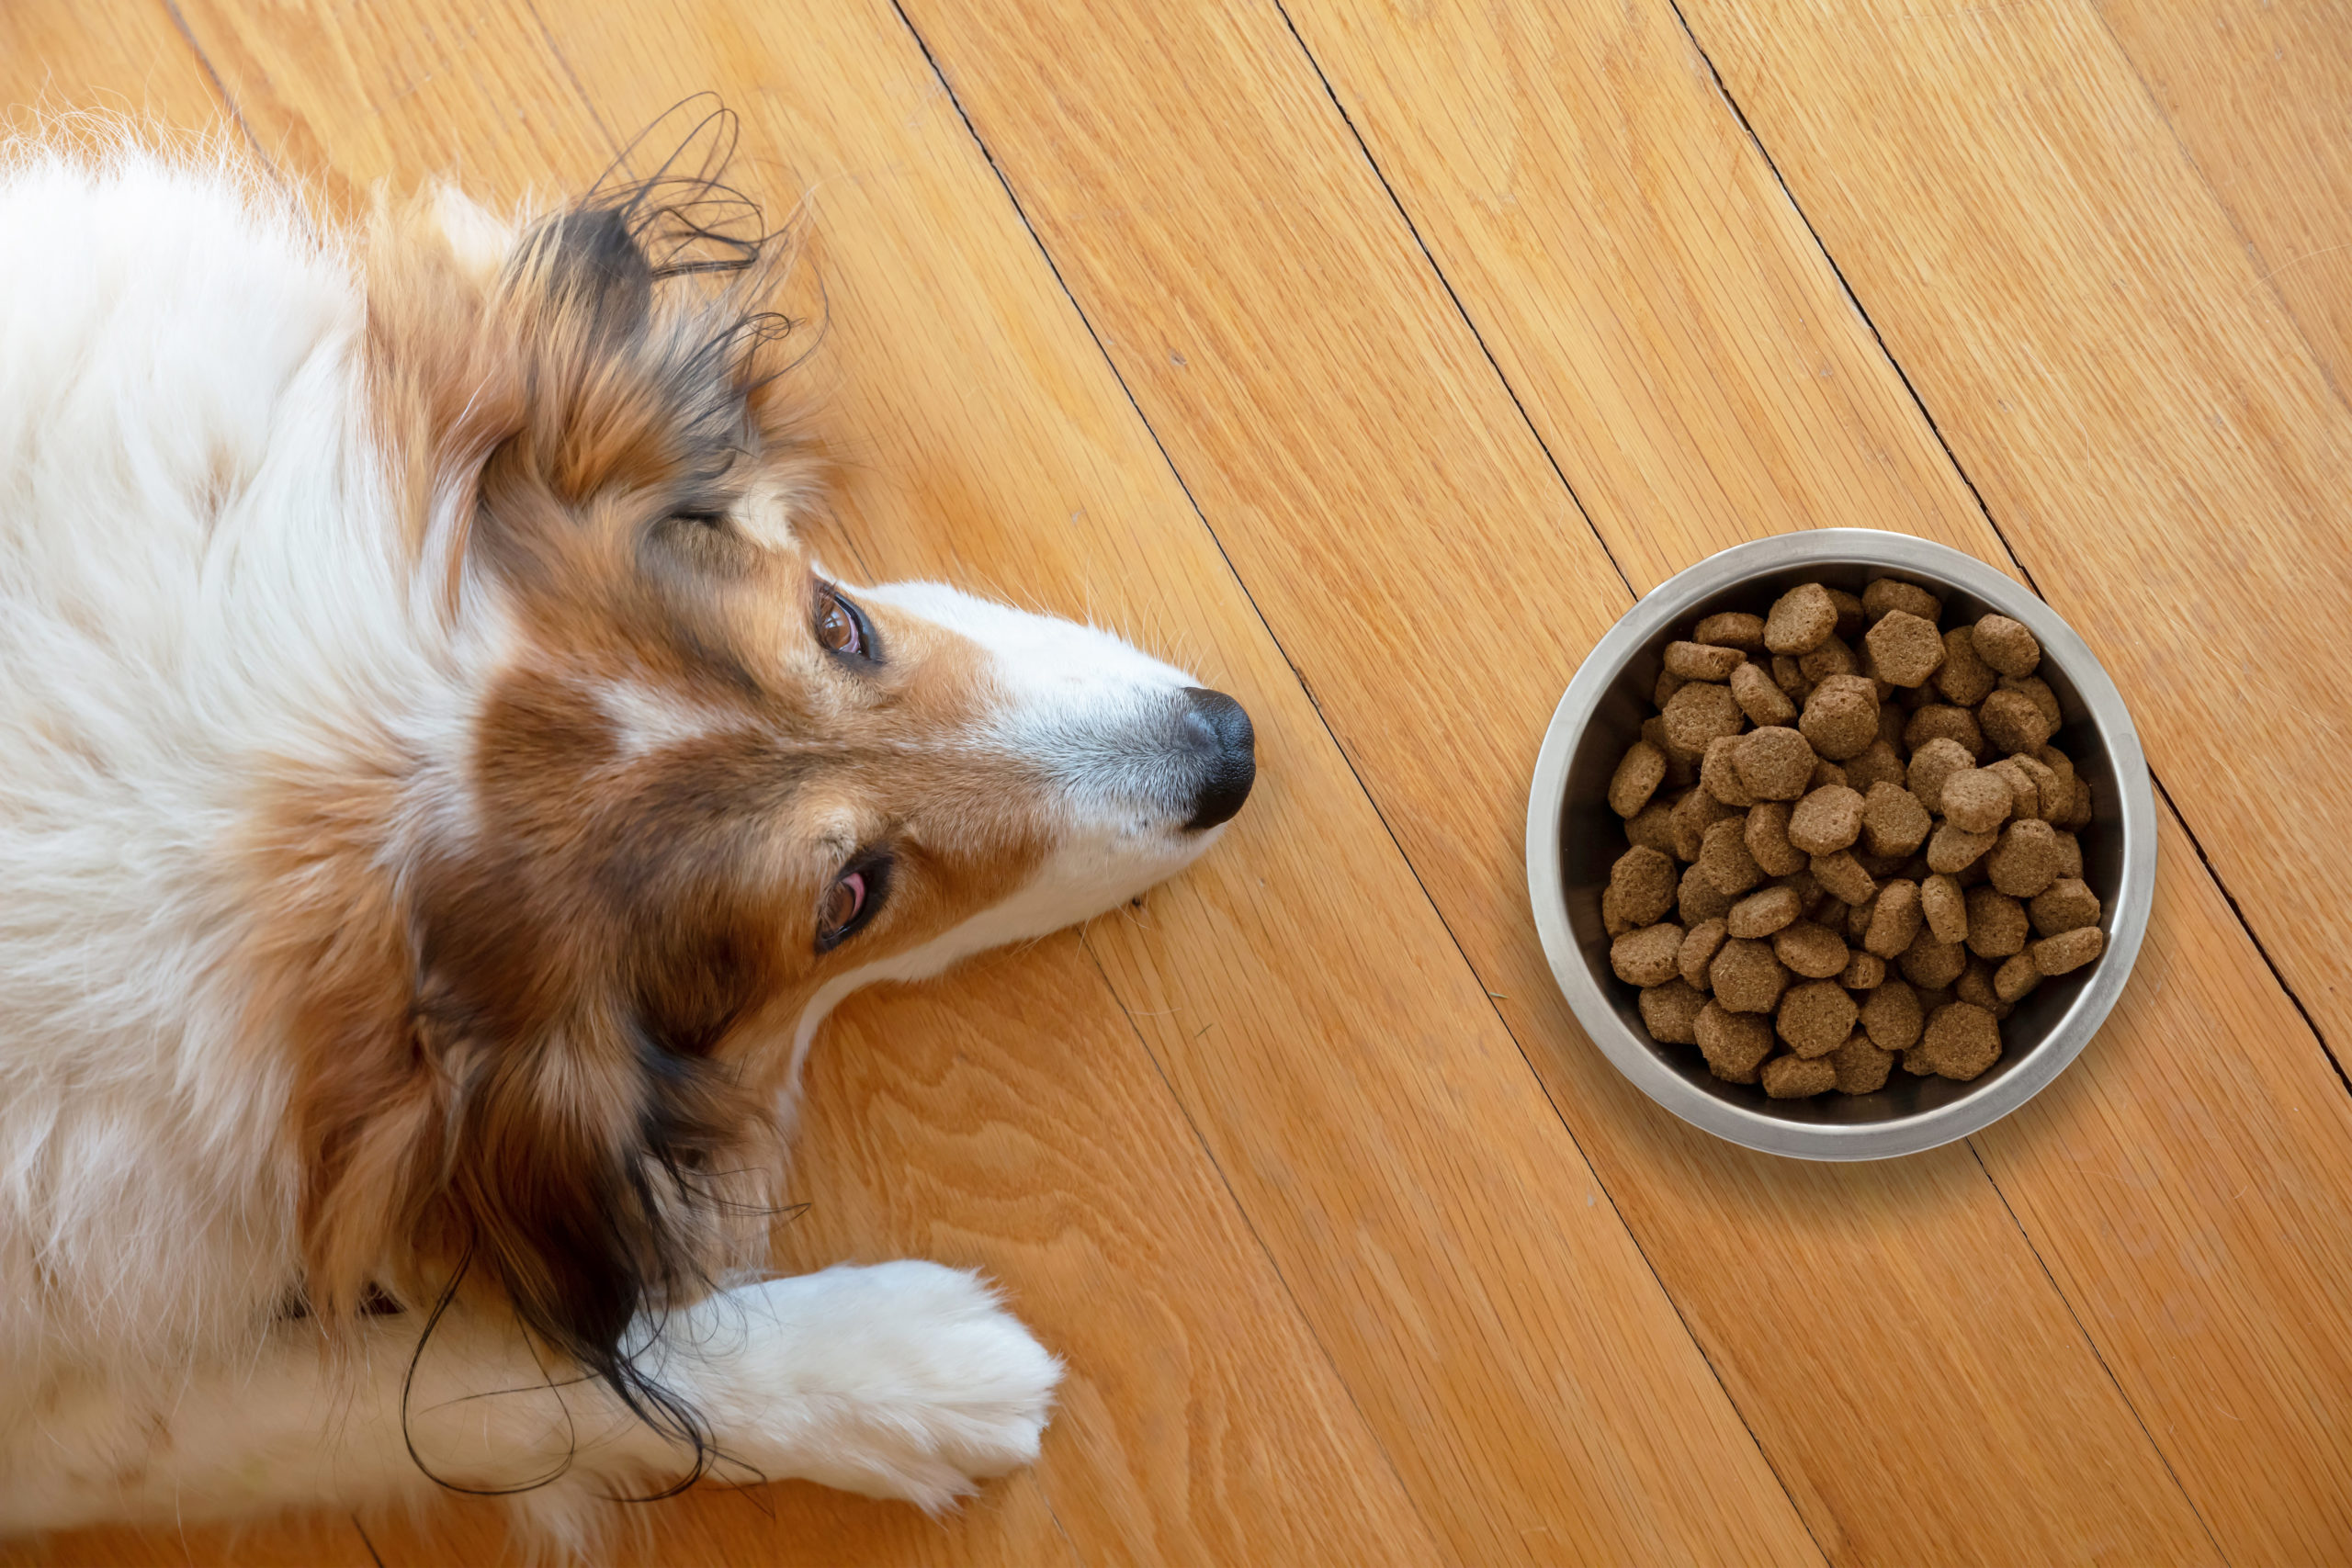 Pet anorexia, dog is sick or bored. Sshepherd dog and a bowl with dry food on wooden floor background, top view